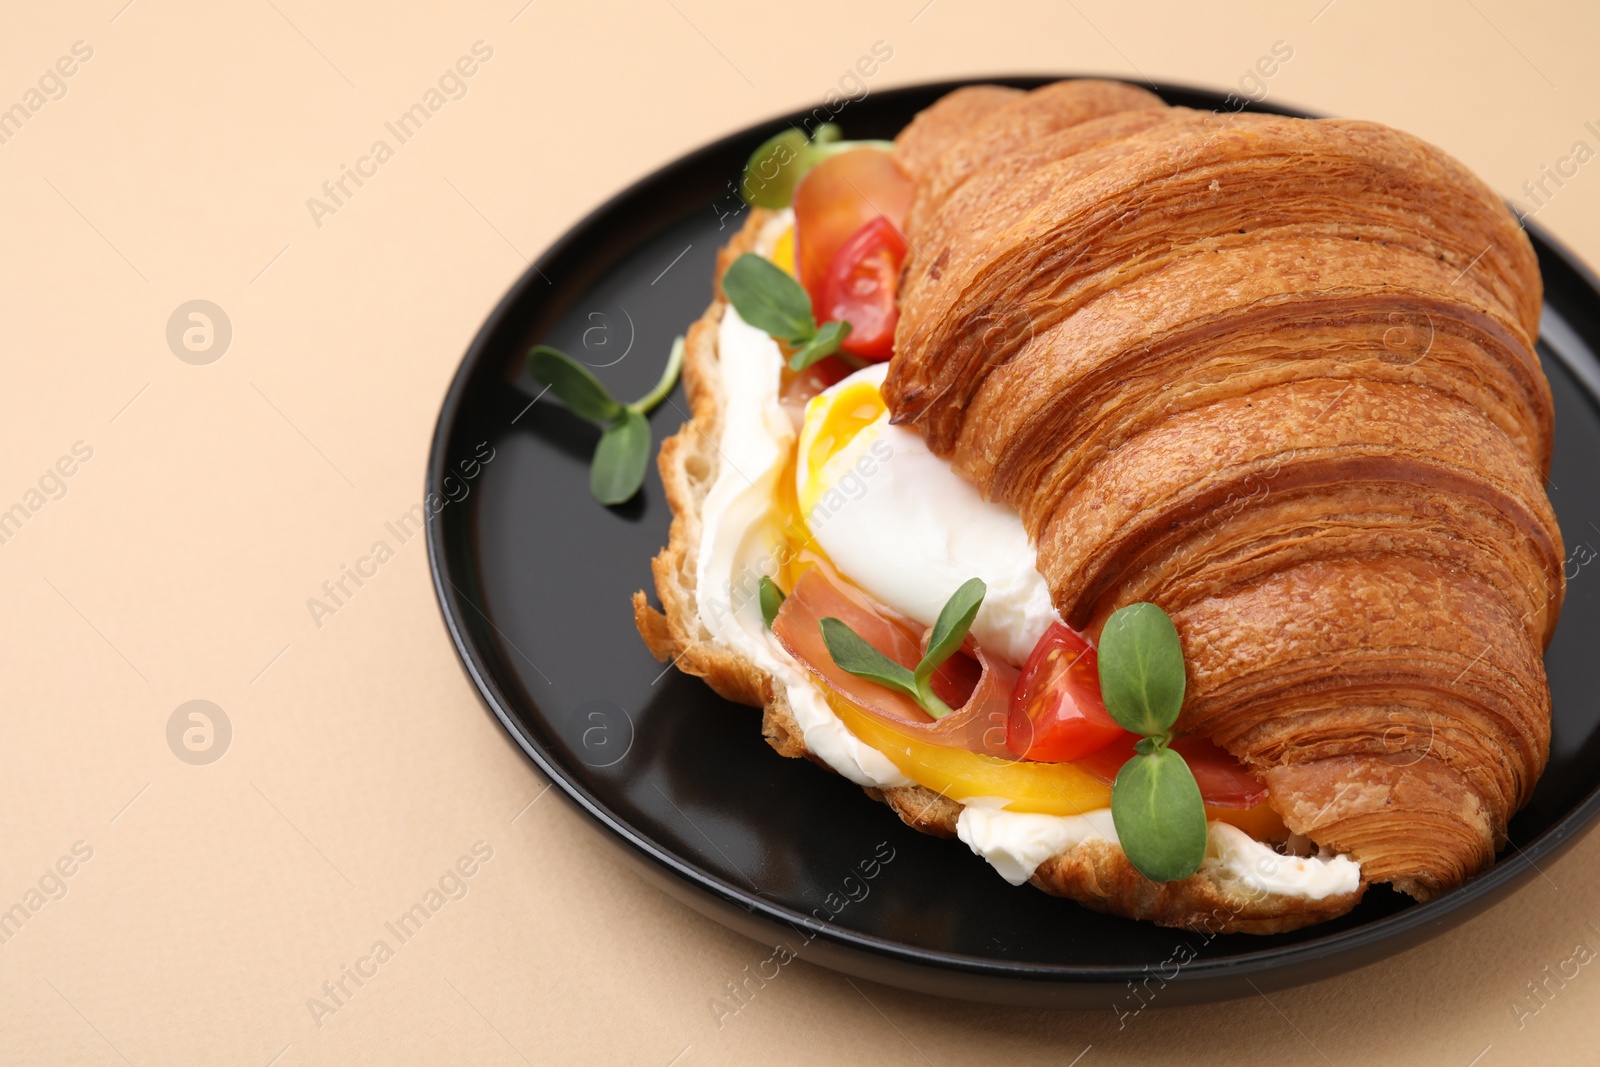 Photo of Tasty croissant with fried egg, tomato and microgreens on beige background, closeup